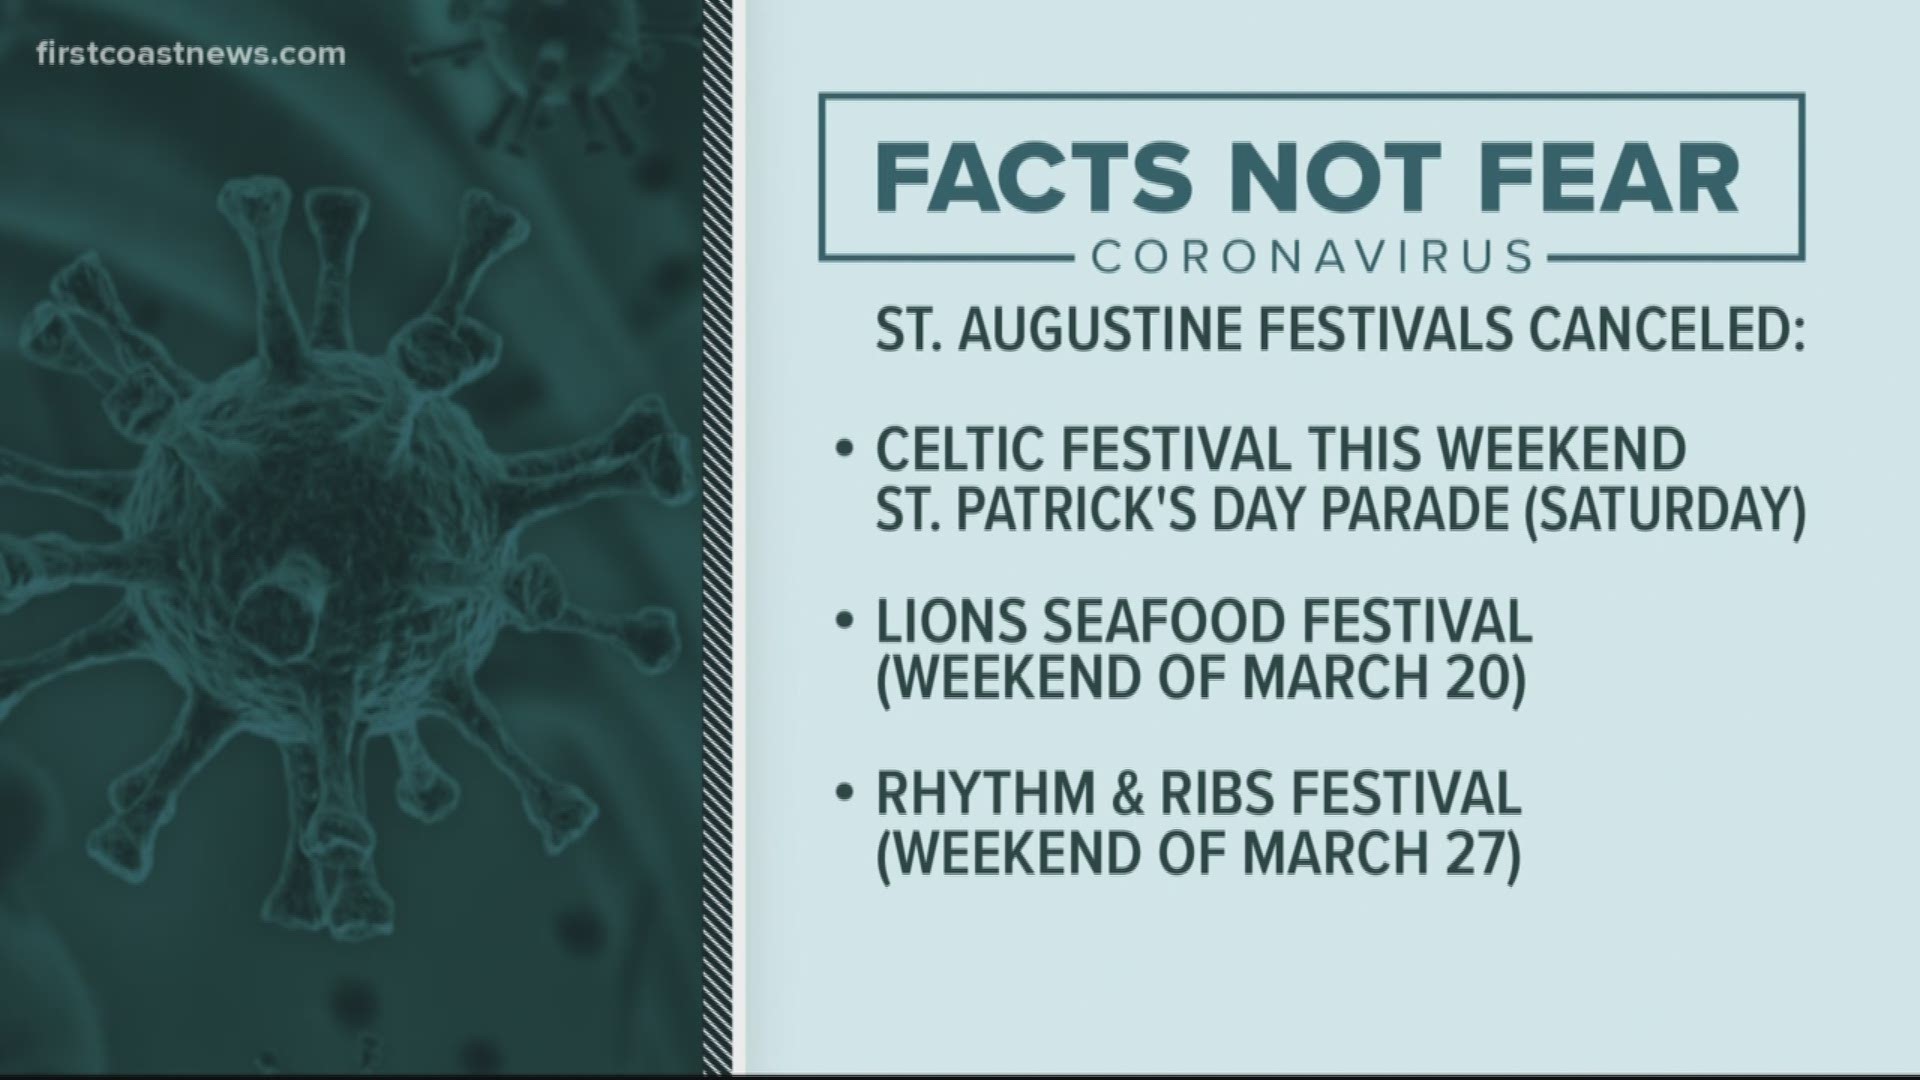 The St. Augustine Celtic Music & Heritage Festival and Parade, Lions Seafood Festival and Rotary's and Ribs Festival have all been canceled.